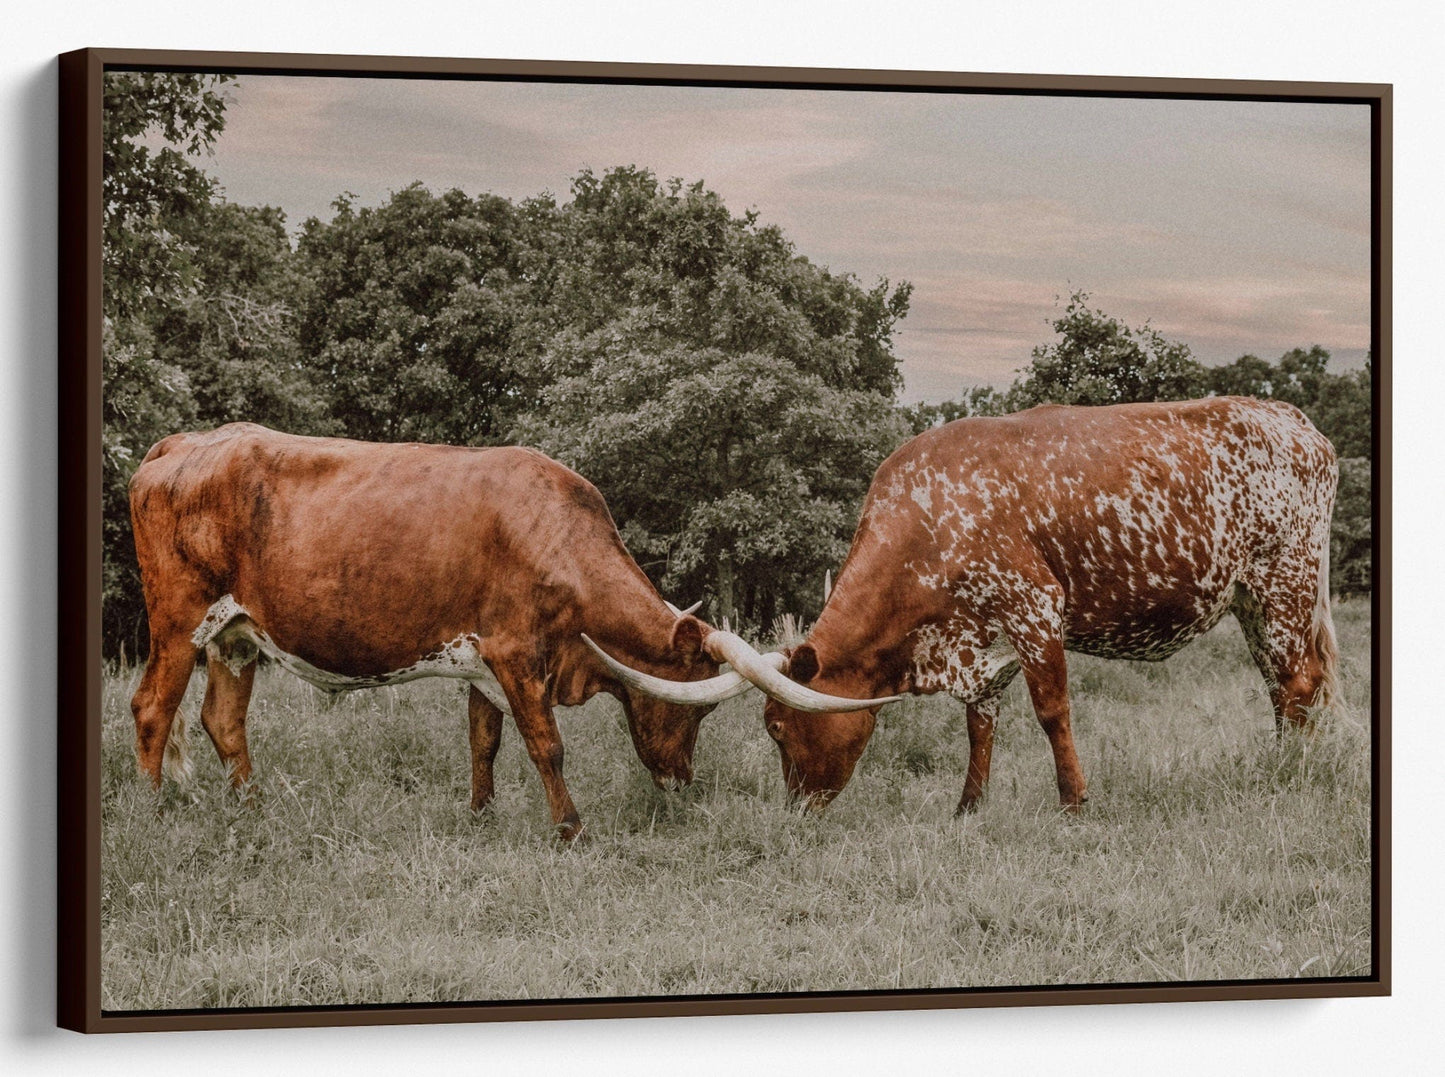 Texas Longhorn Cattle Wall Art in Muted Colors Canvas-Walnut Frame / 12 x 18 Inches Wall Art Teri James Photography